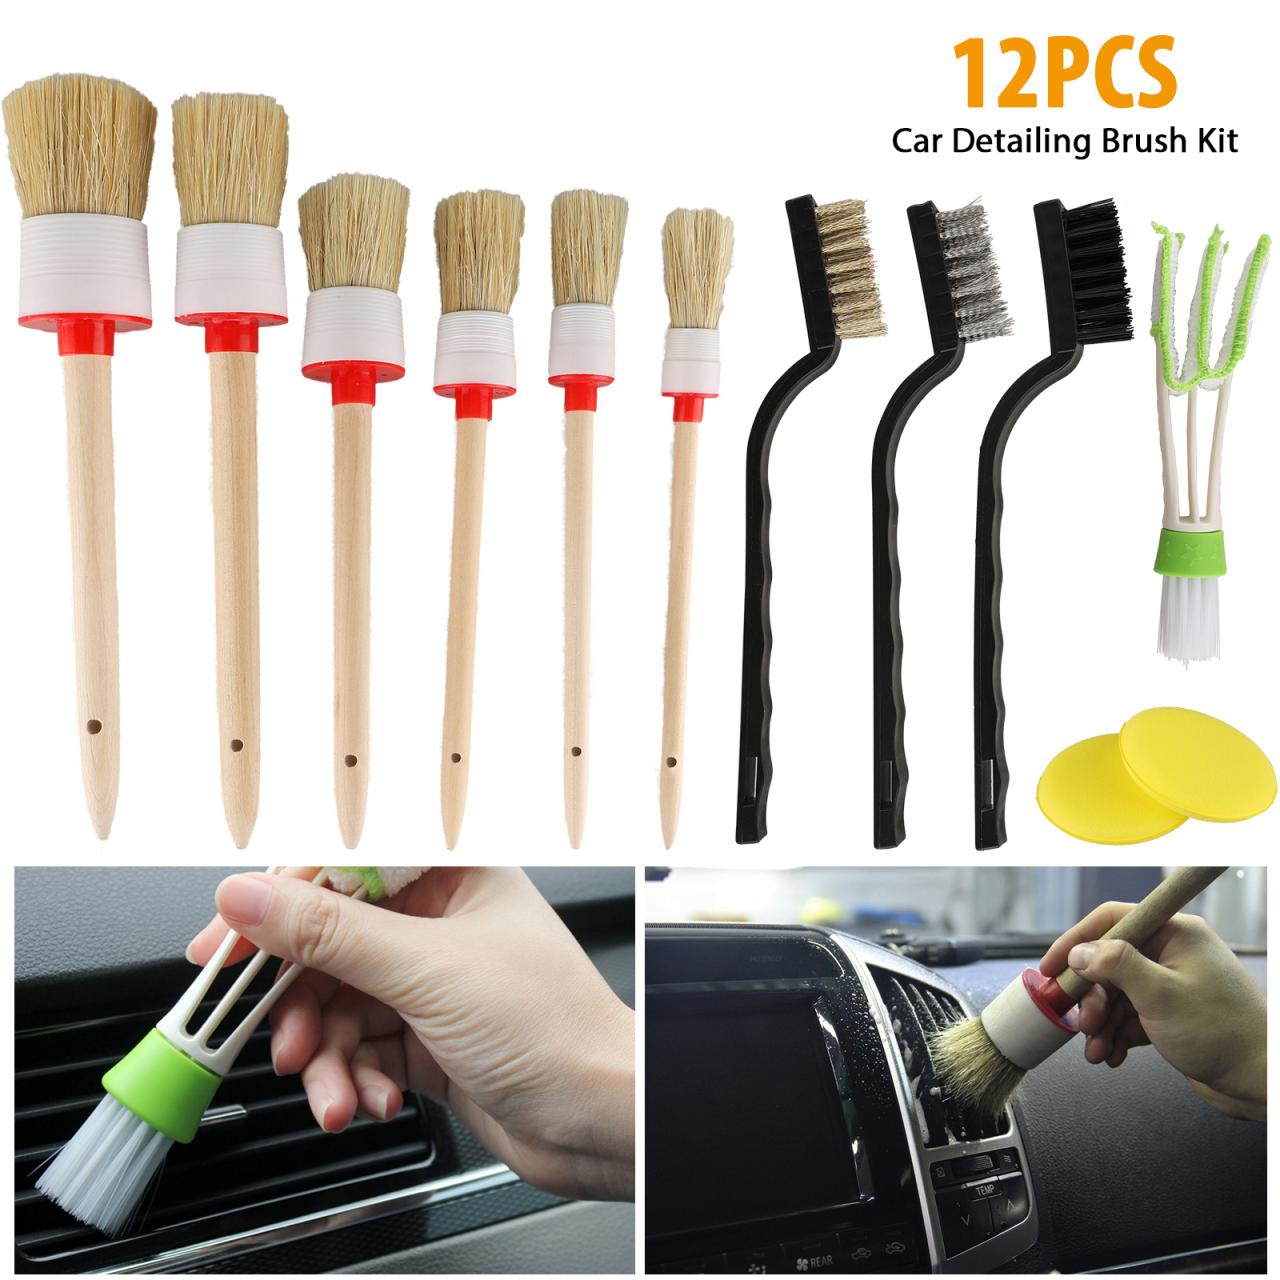 12 Pieces Auto Detailing Brush Set for Cleaning Wheels, Interior, Exterior,  Leather, Car Cleaner Brush Set For Cleaning Engine, Wheel, Interior, Air  Vent, Car, Motorcycle | Walmart Canada